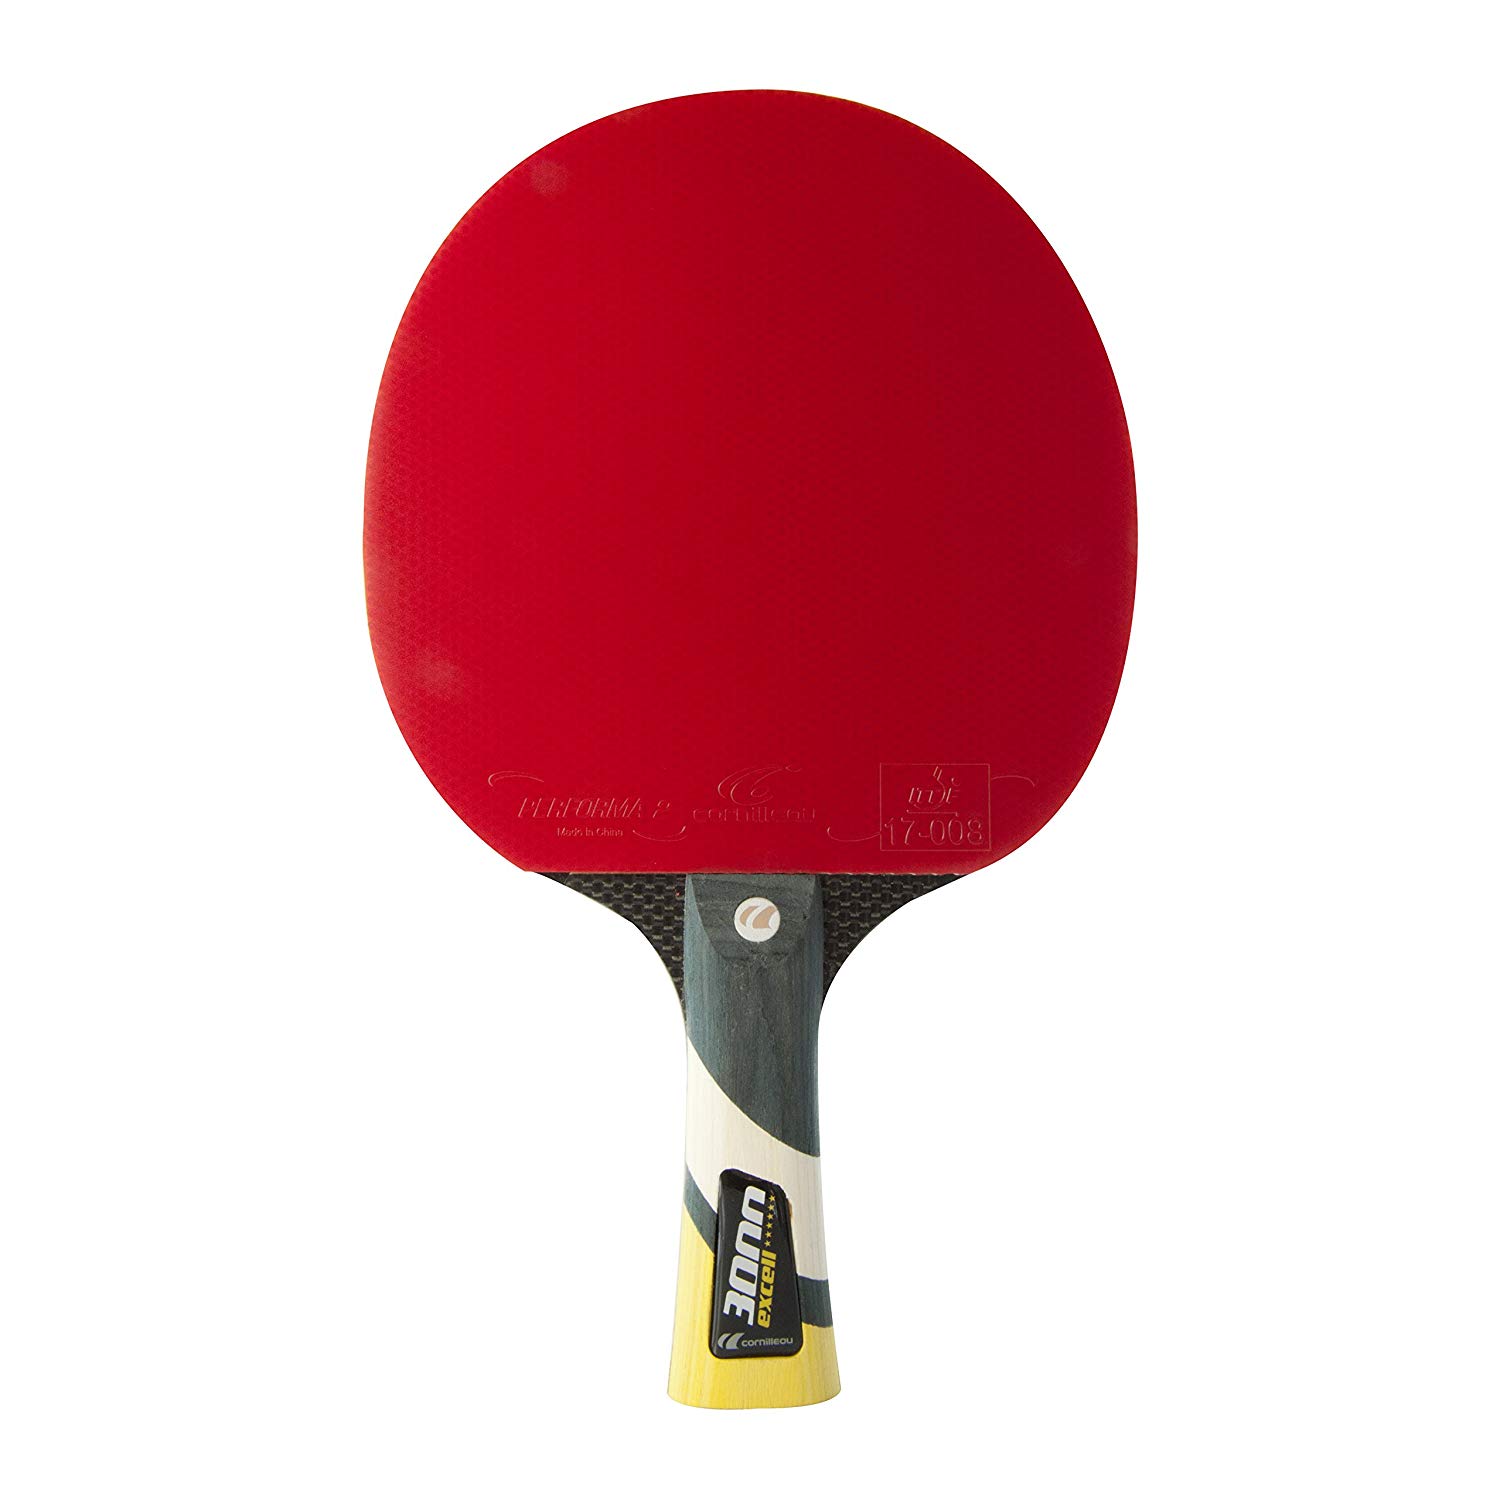 Grillig huilen droog 3000 Excell Carbon Ping Pong Paddle (Table Tennis Racket) | Cornilleau